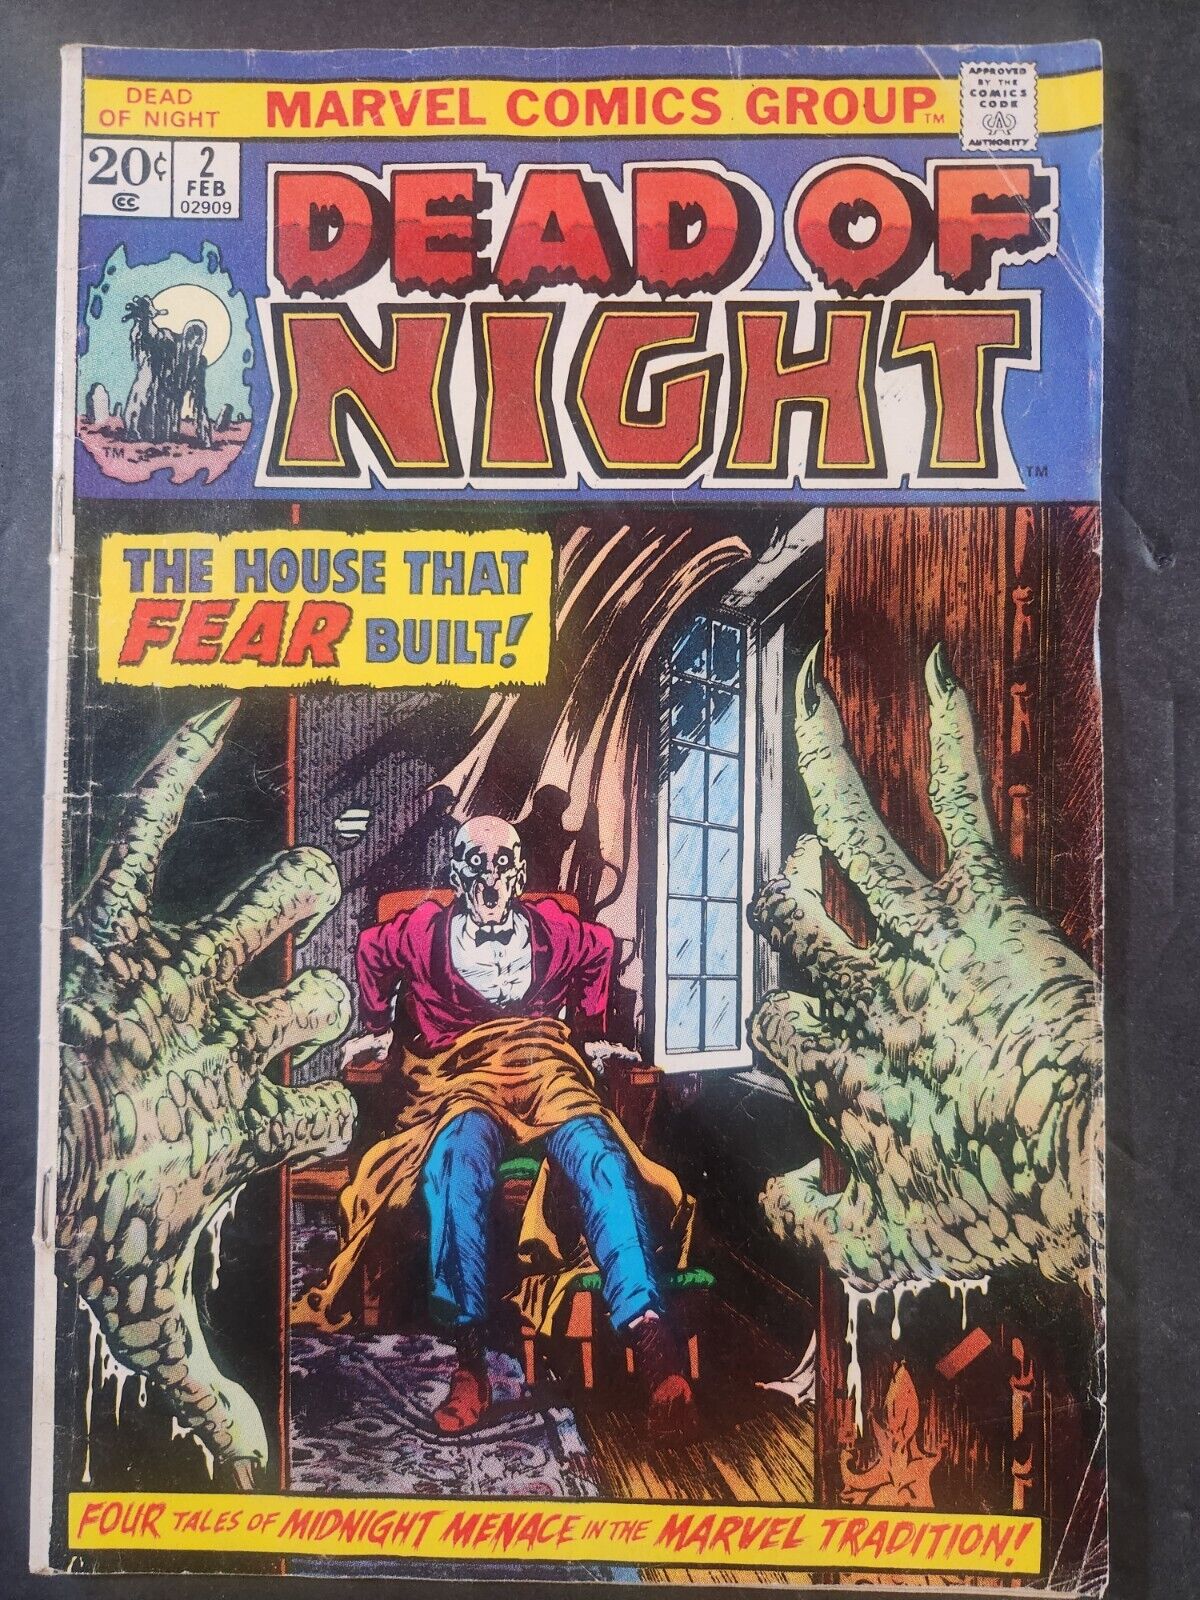 DEAD OF NIGHT #2 MARVEL 1974 BRONZE AGE HORROR THE HOUSE THAT FEAR BUILT VG/FN